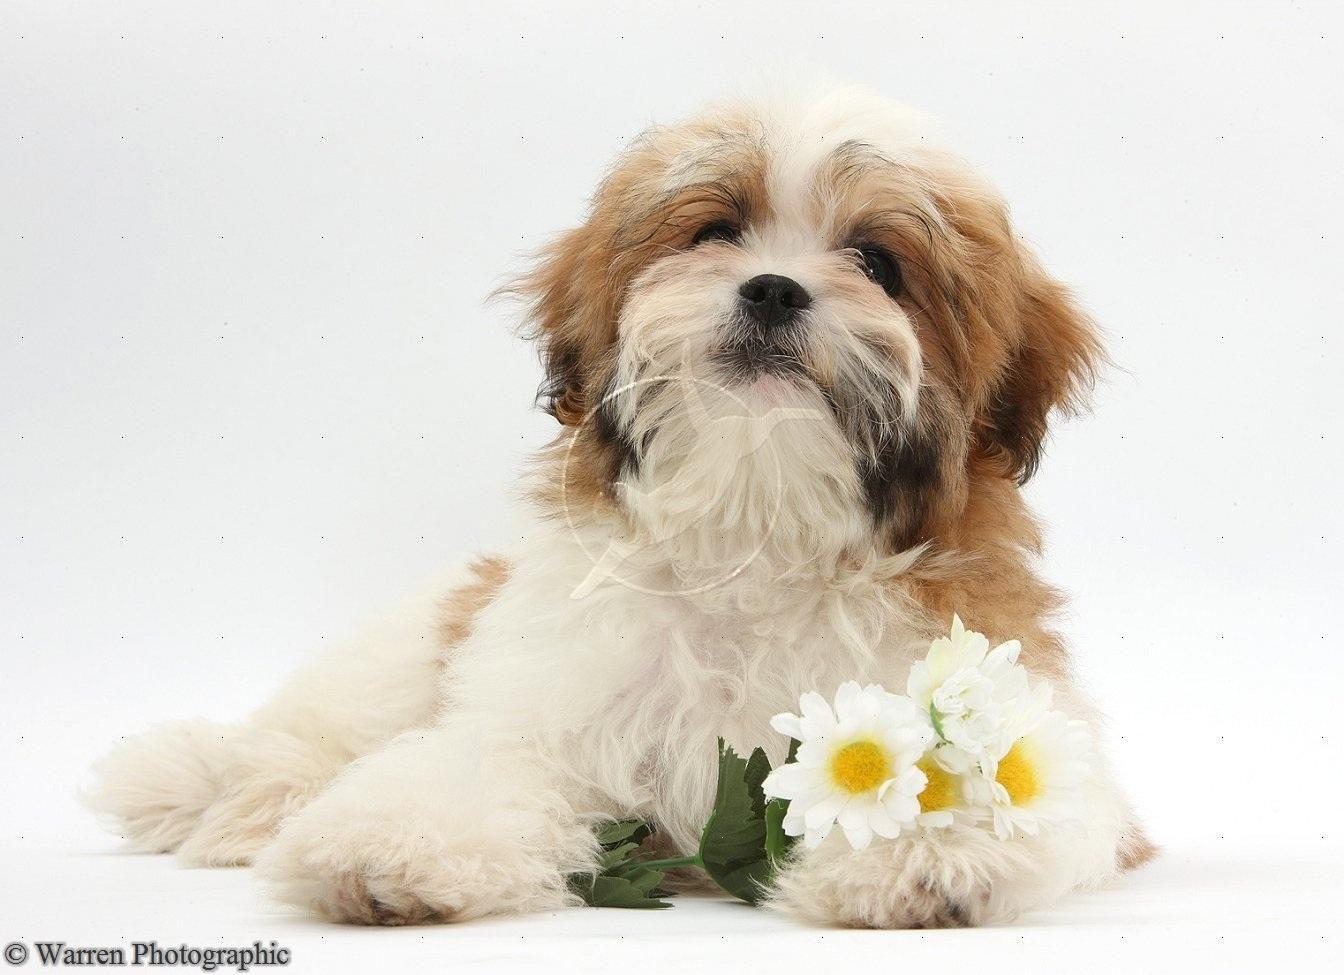 Maltese Shih Tzu Pup With Flowers White Background. Dogs are Best